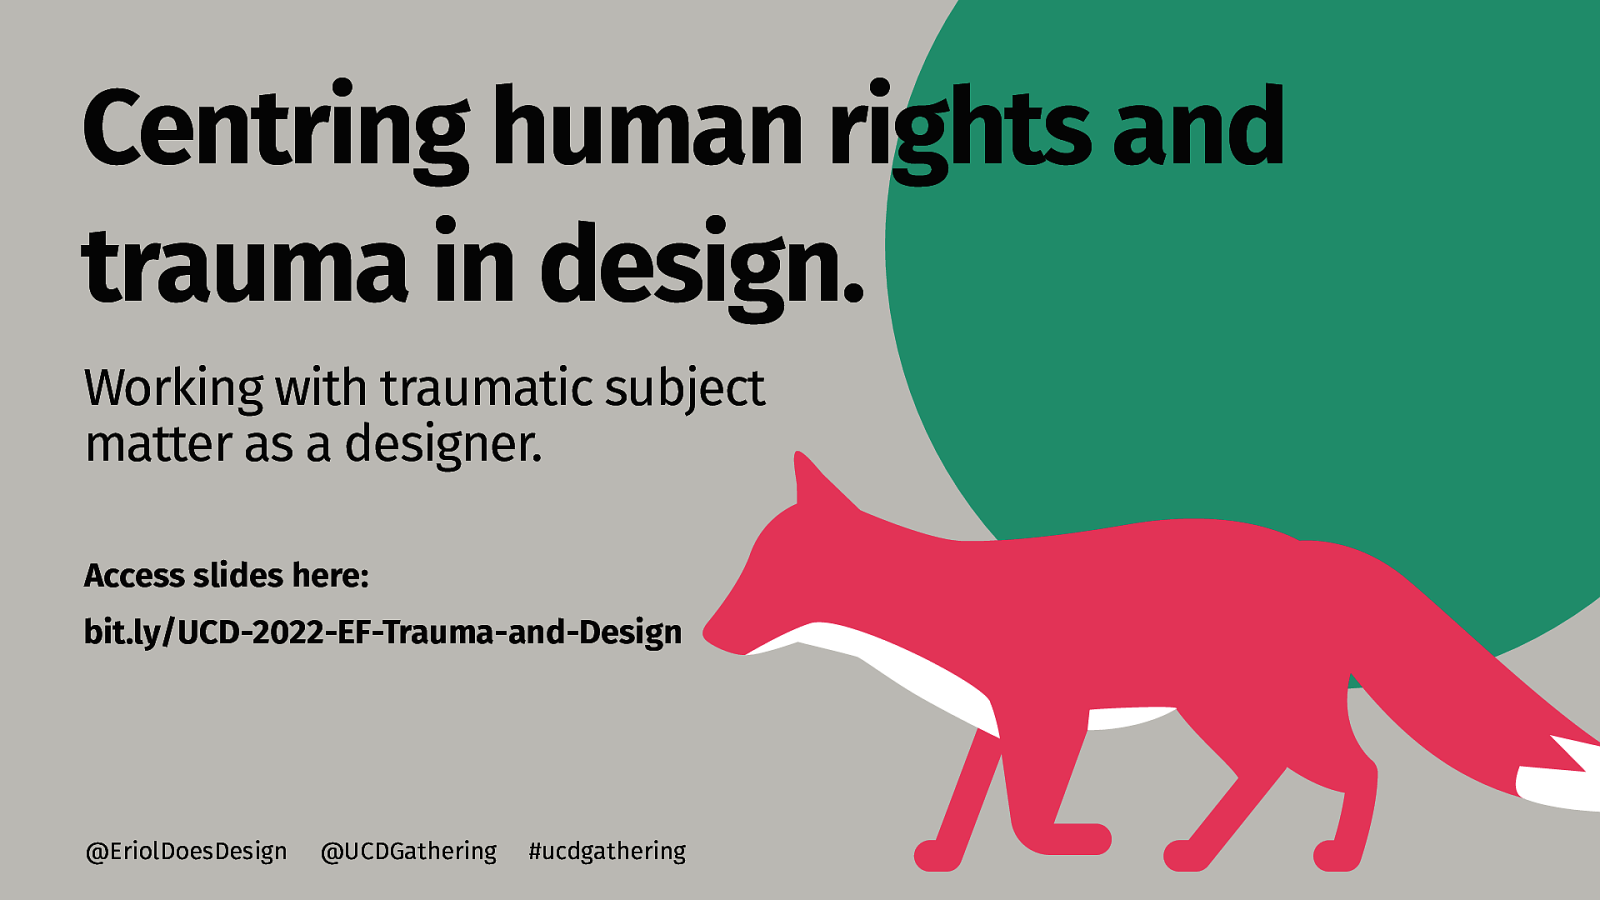 Centring human rights and trauma in design.